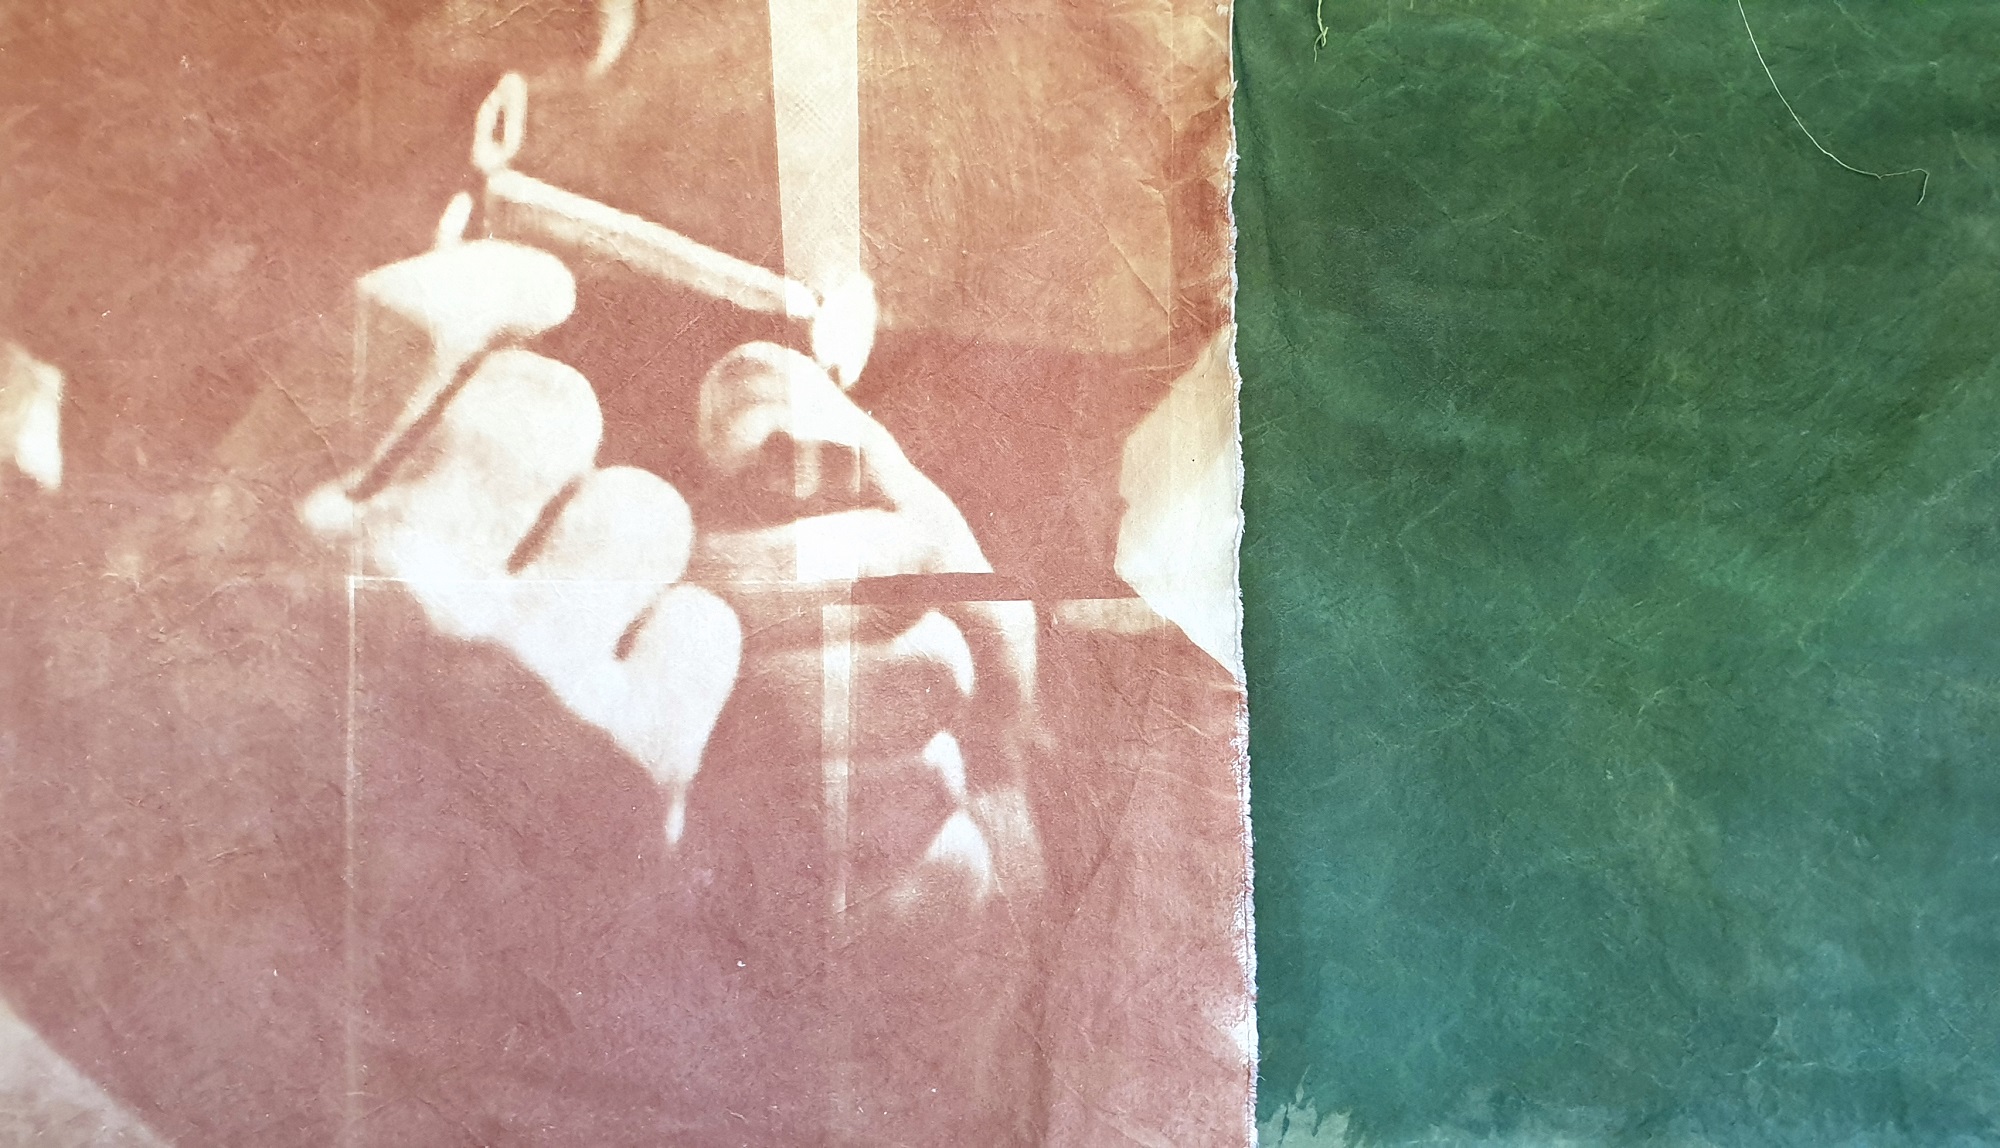 A brown and green UV exposure dye print on canvas with two hands holding a lighter by Jeremy Eaton